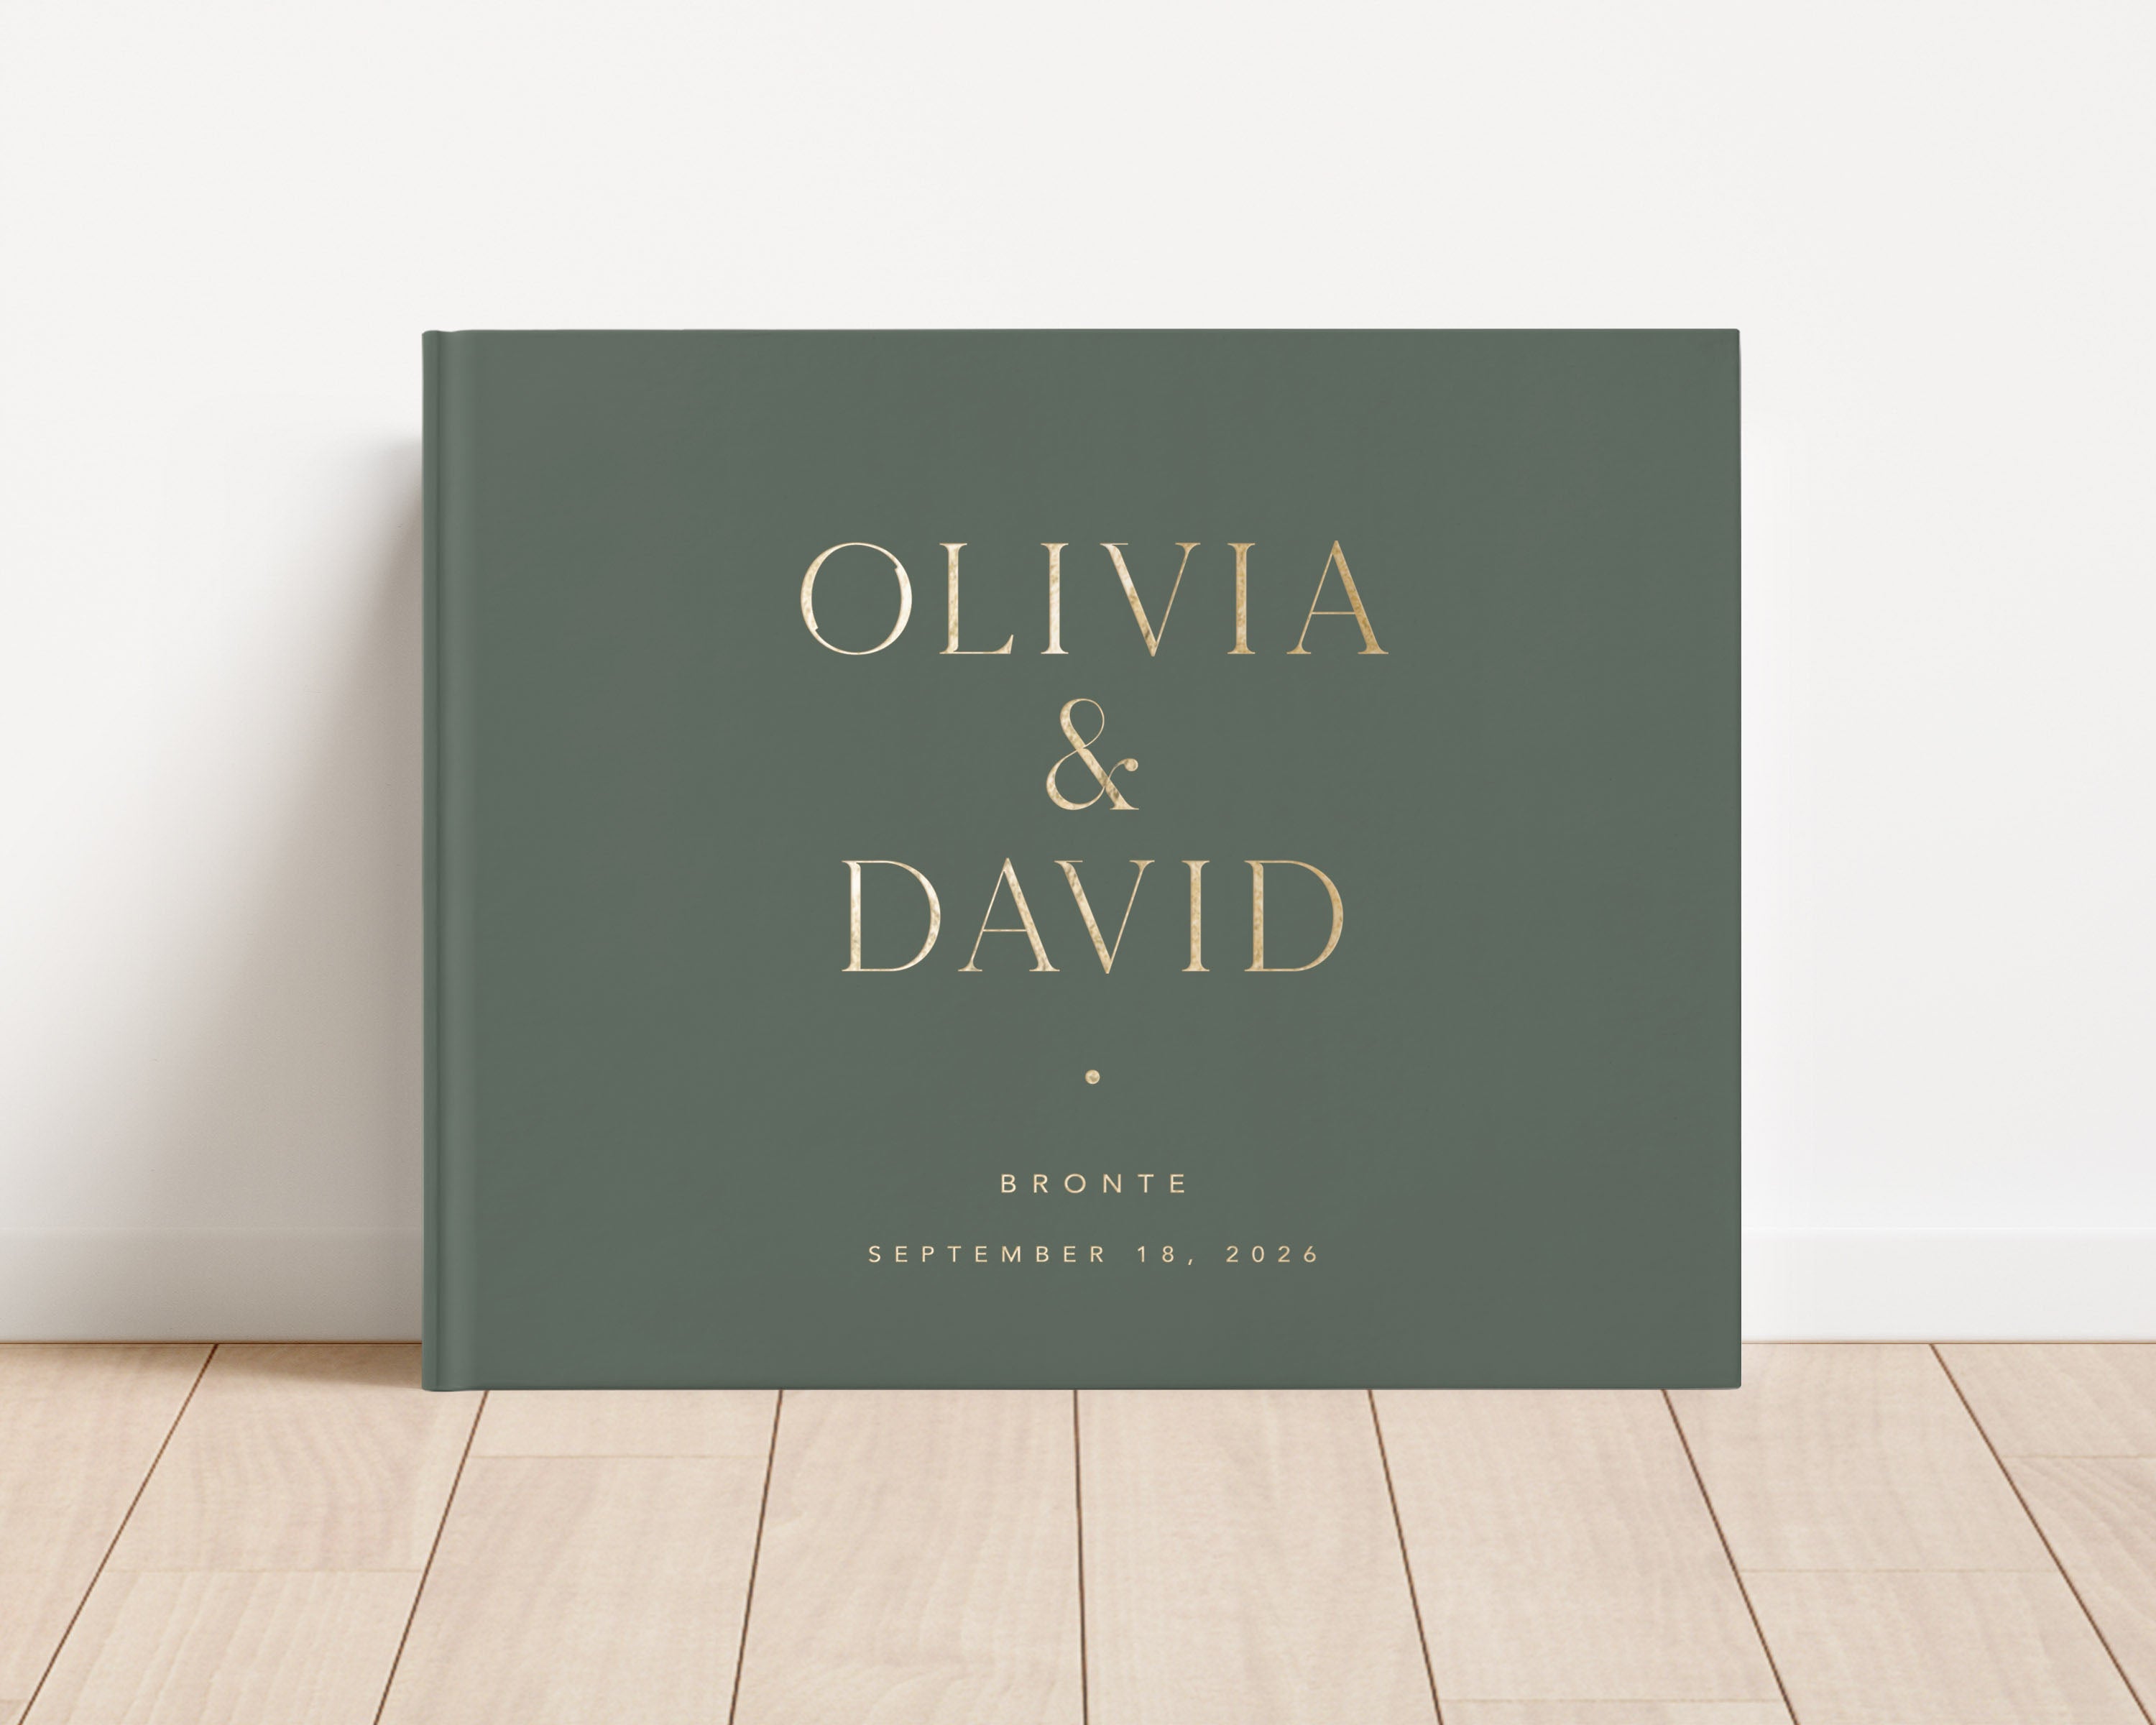 Luxury wedding guest book with custom gold foil text and moss hardback cover.